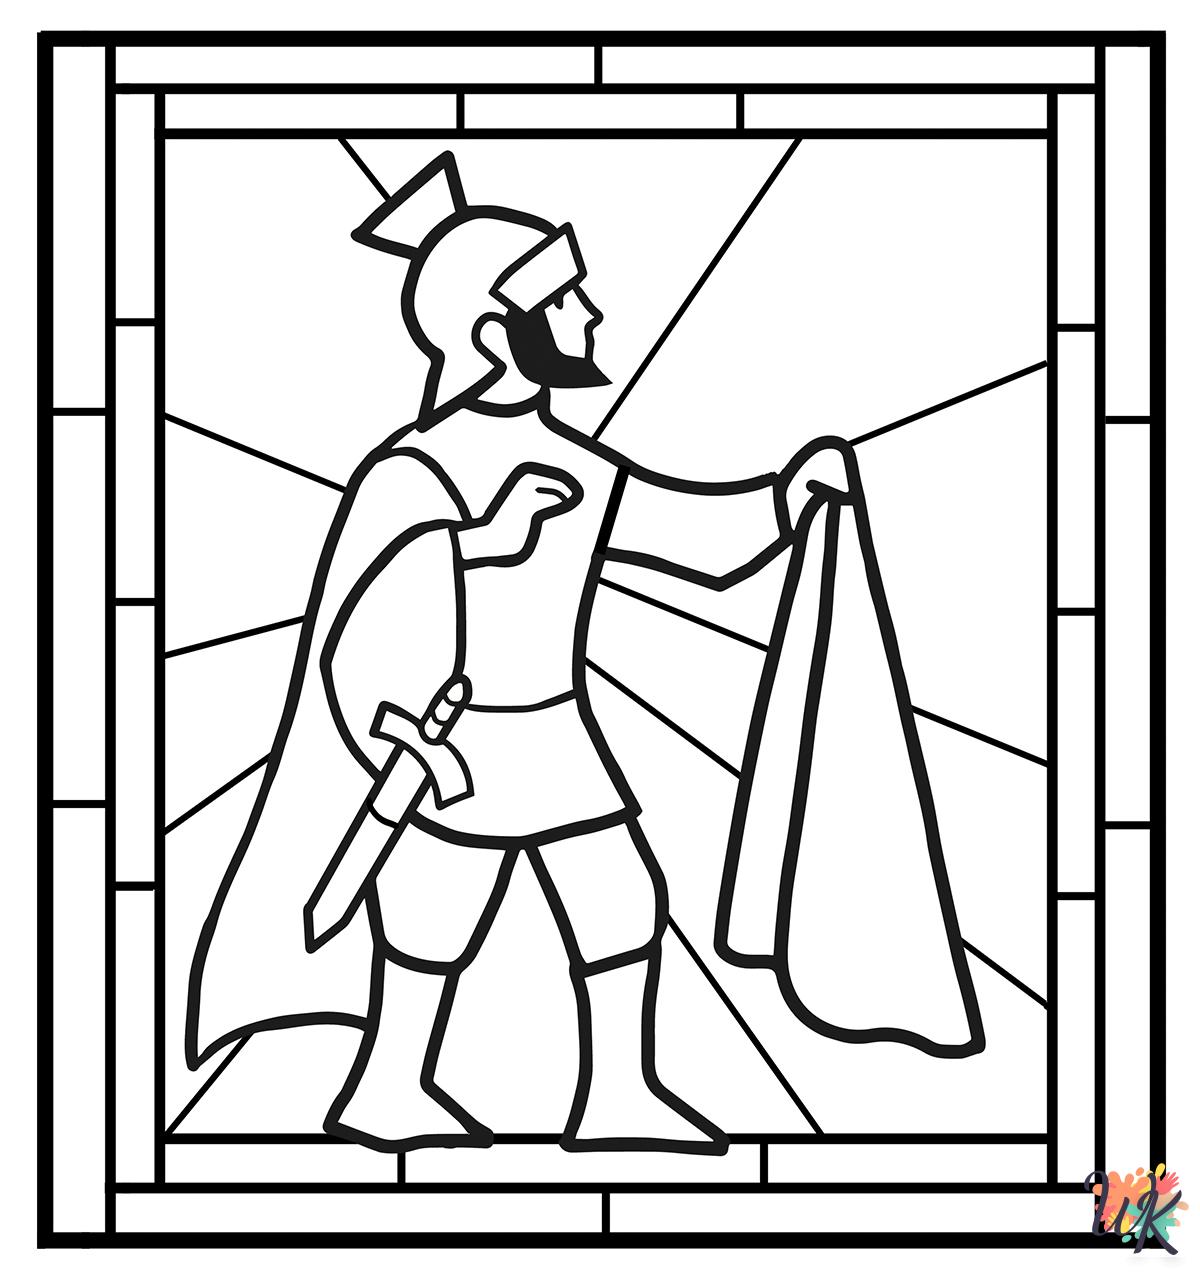 merry Saint Martin coloring pages